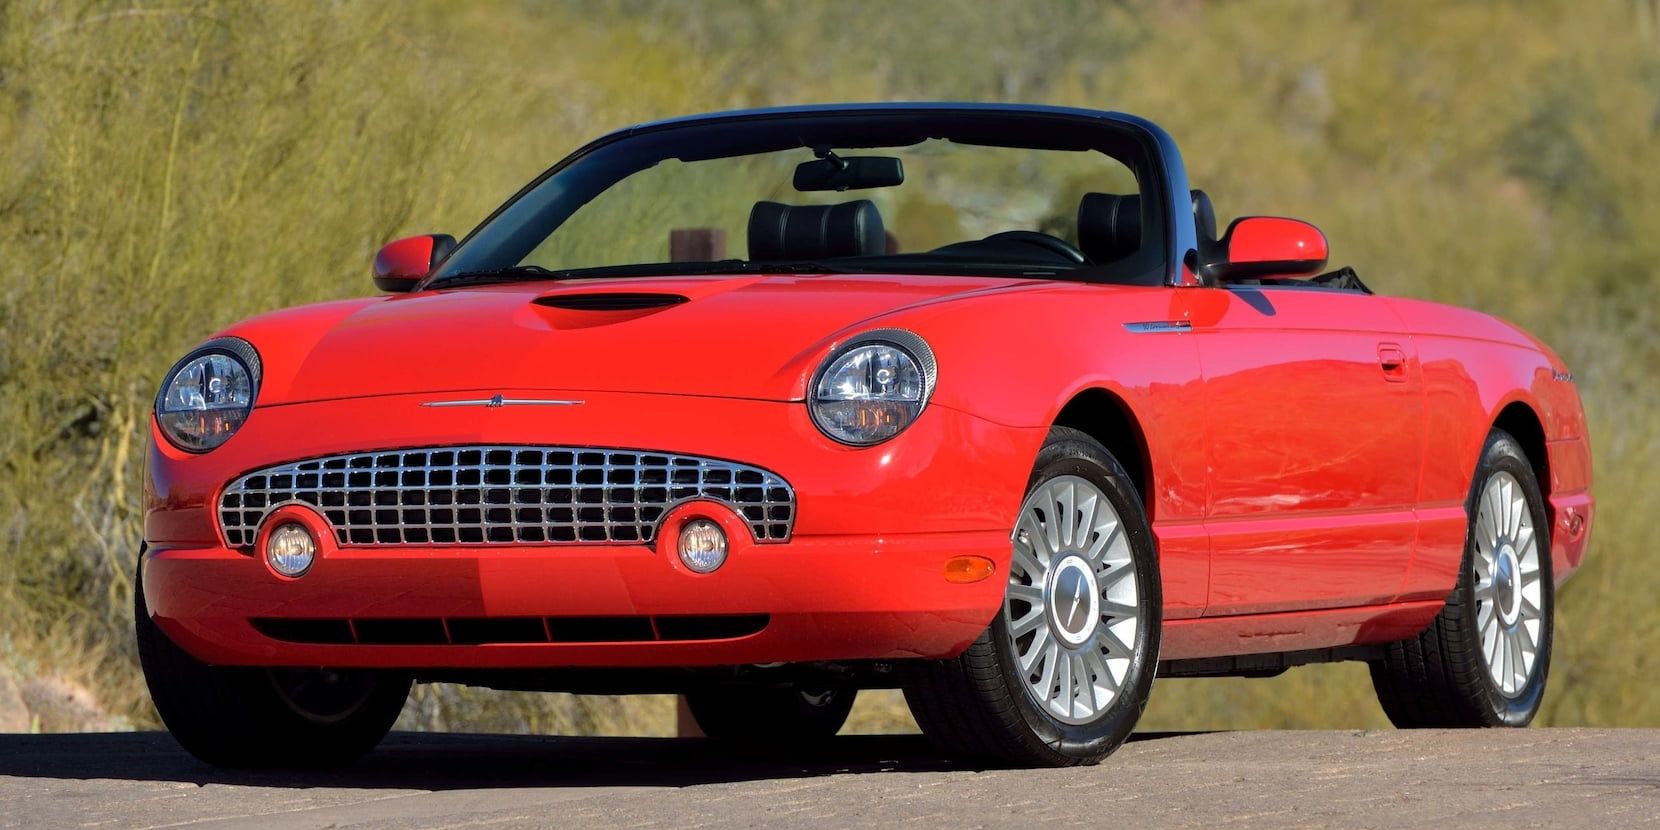 Red 2005 Ford Thunderbird on the road